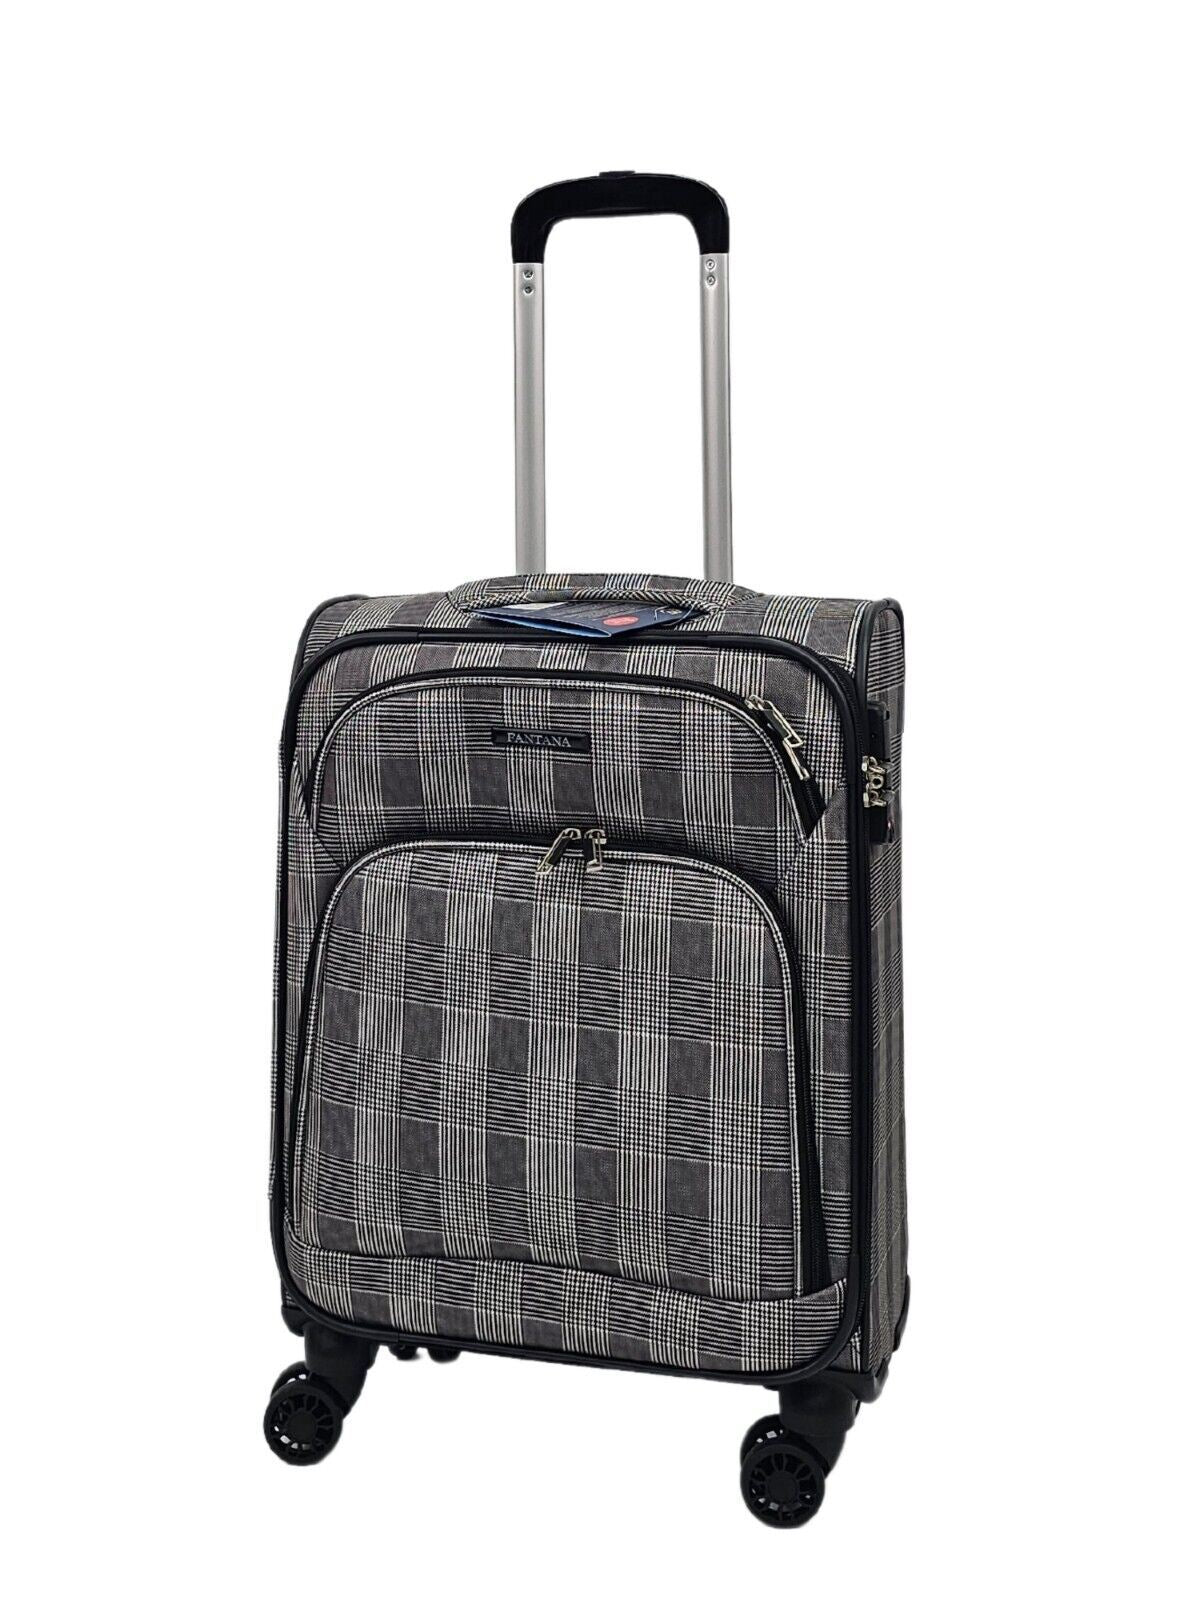 Lightweight Suitcases 8 Wheel Luggage Stripes Travel Soft Bags - Upperclass Fashions 